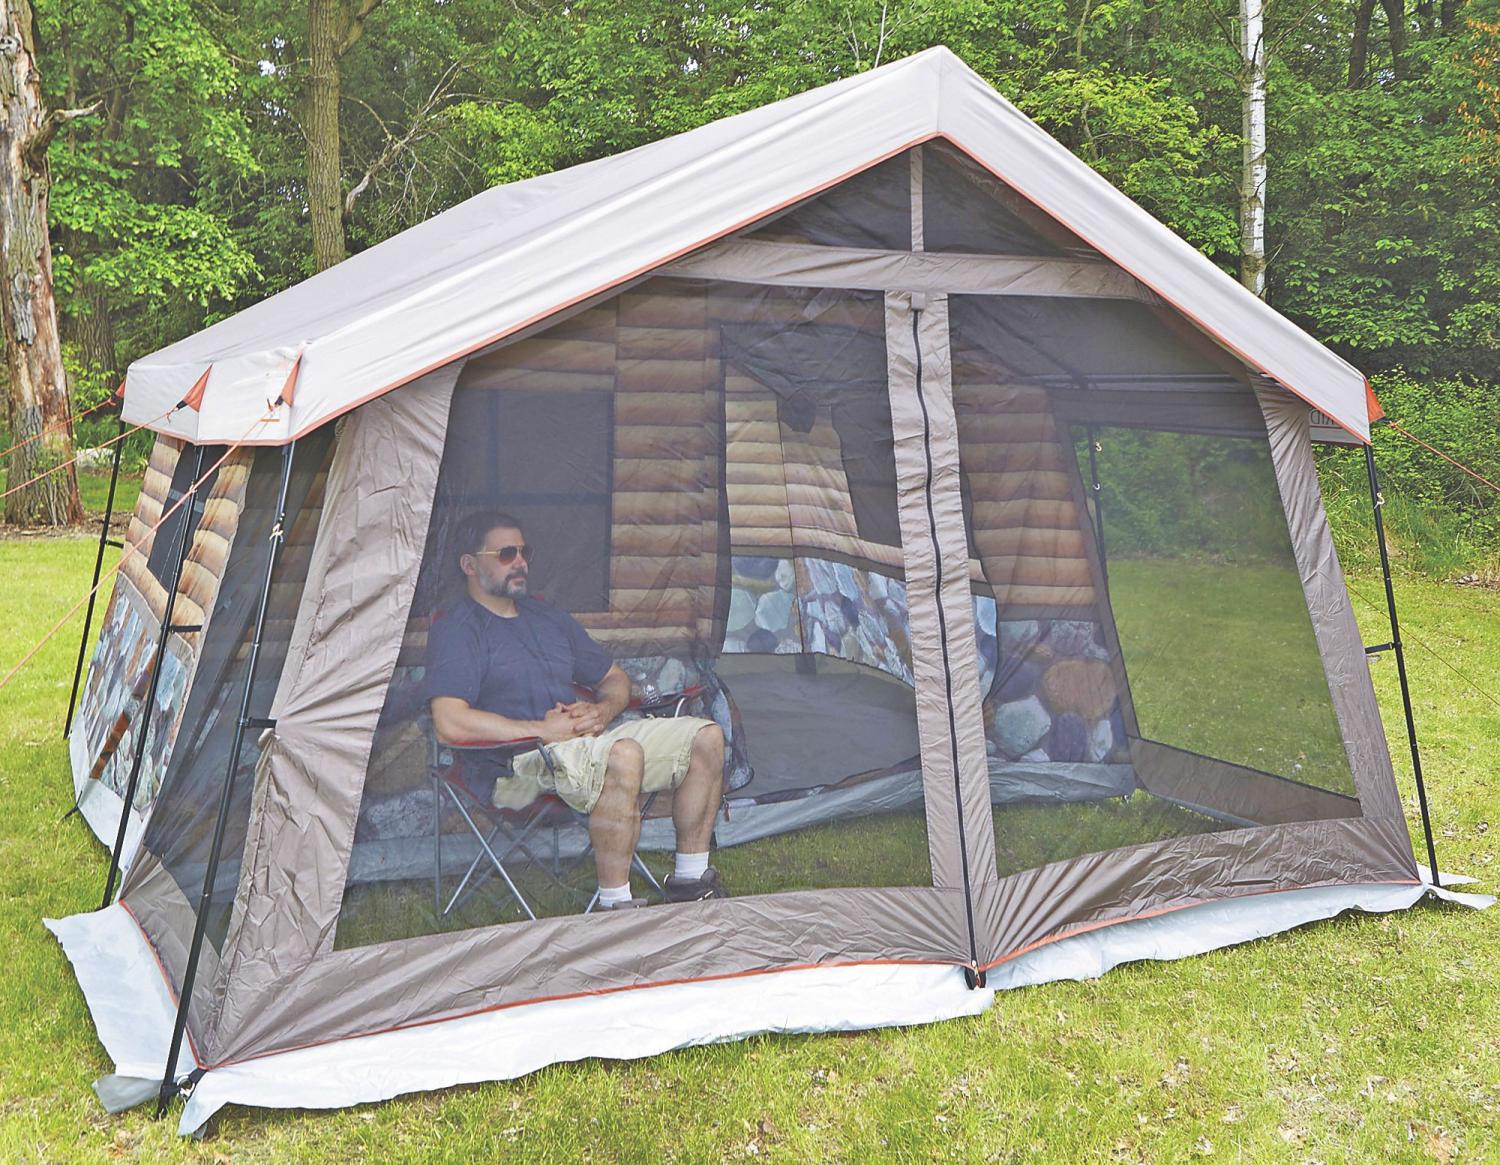 Log Cabin Tent With Front Porch - Giant 8-person tent looks just like a log cabin